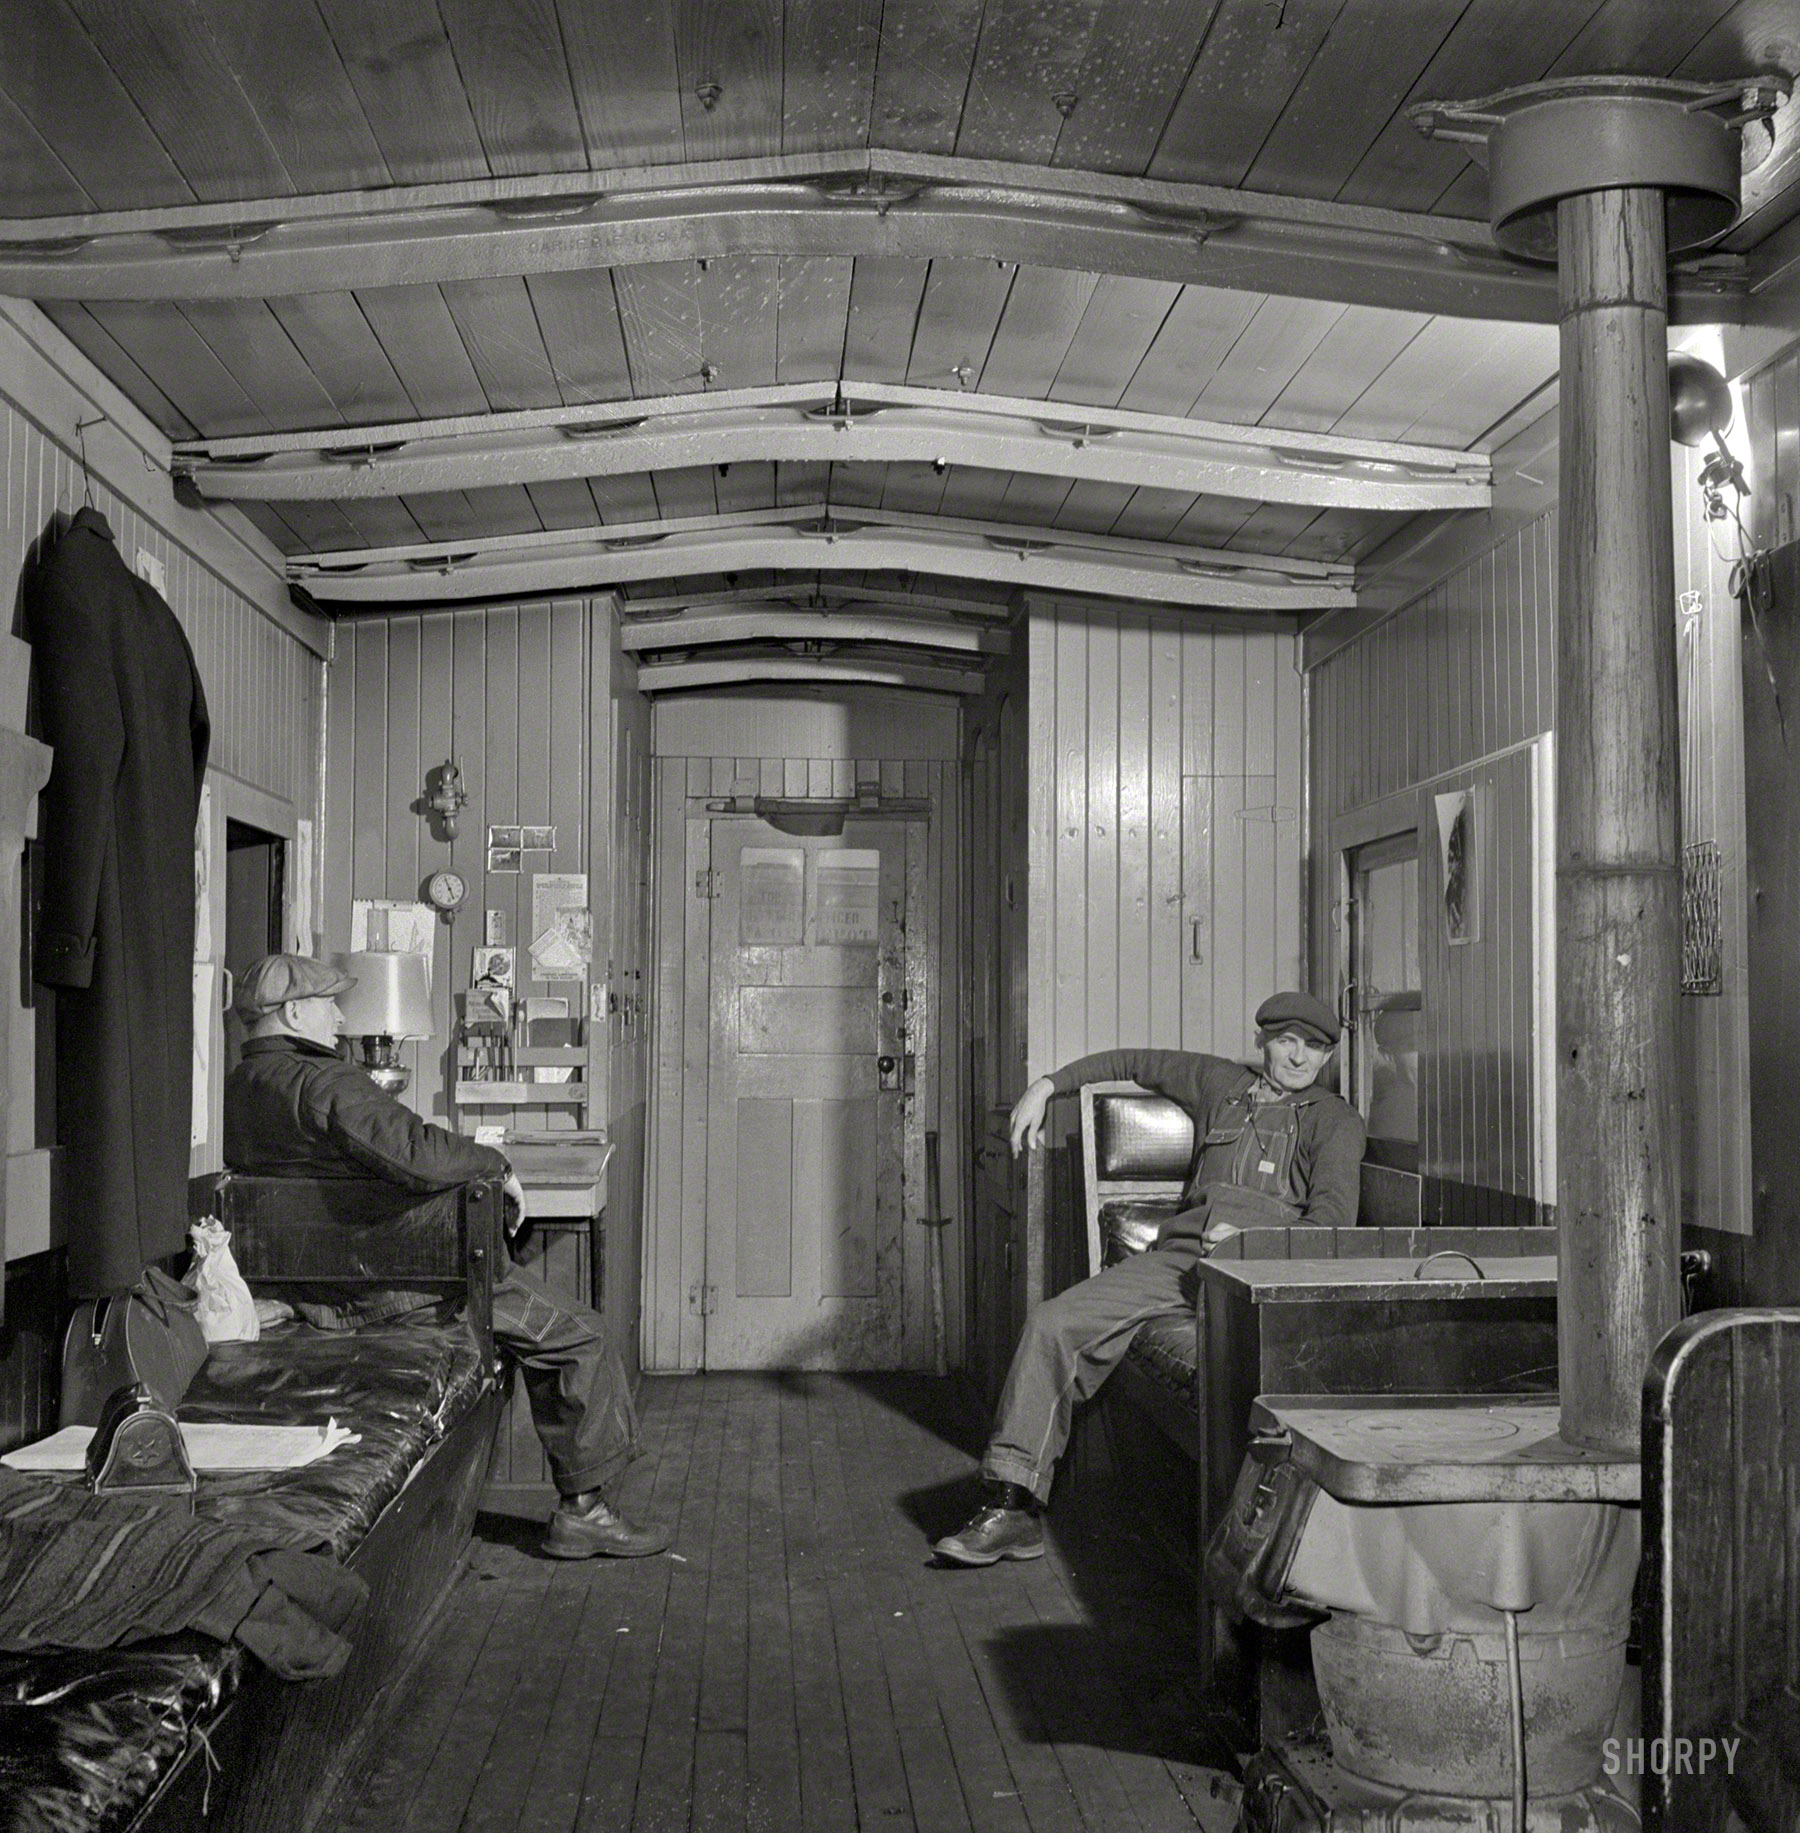 January 1943. "Freight operations on the Indiana Harbor Belt railroad between Chicago and Hammond, Indiana. Belt Line cabooses never go long distances or at very high speeds and are therefore constructed differently from line cabooses." Photo by Jack Delano for the Office of War Information. View full size.